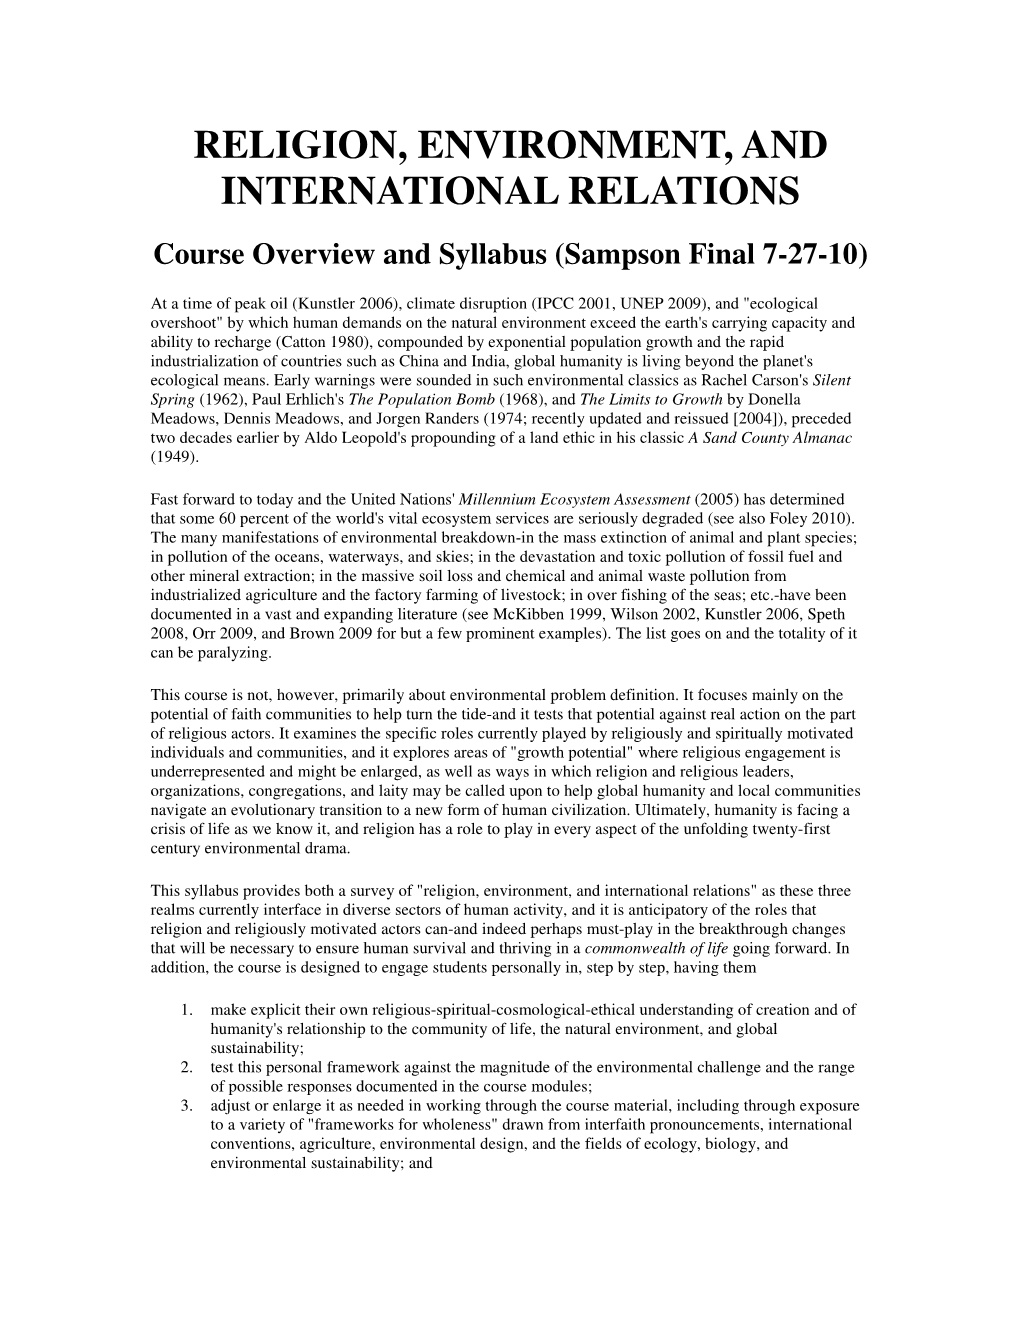 RELIGION, ENVIRONMENT, and INTERNATIONAL RELATIONS Course Overview and Syllabus (Sampson Final 7-27-10)